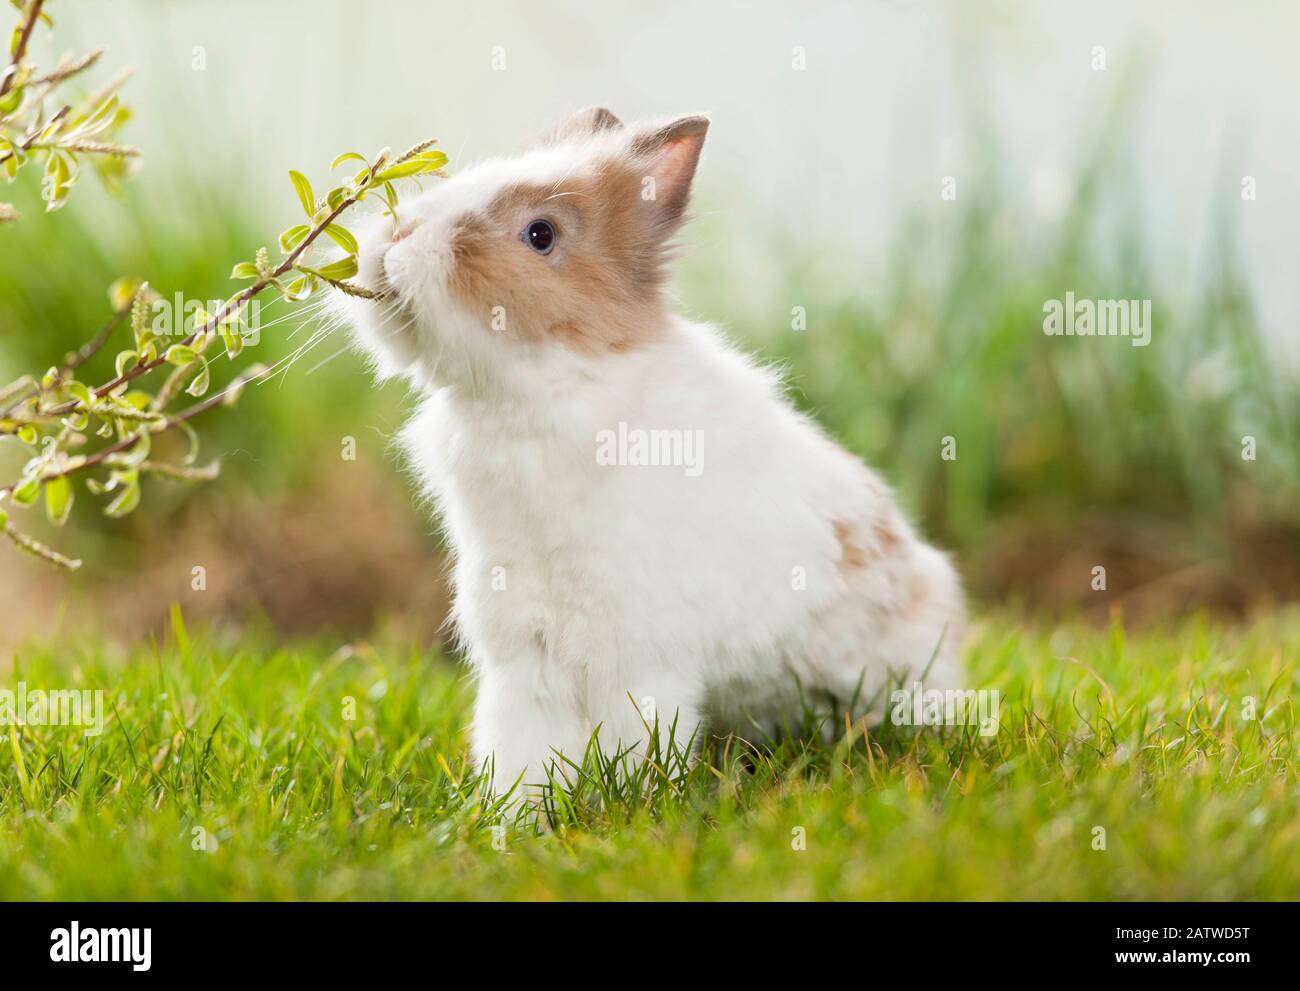 Dwarf Rabbit, Lionhead Rabbit in grass, eating a willow twig. Germany Stock Photo